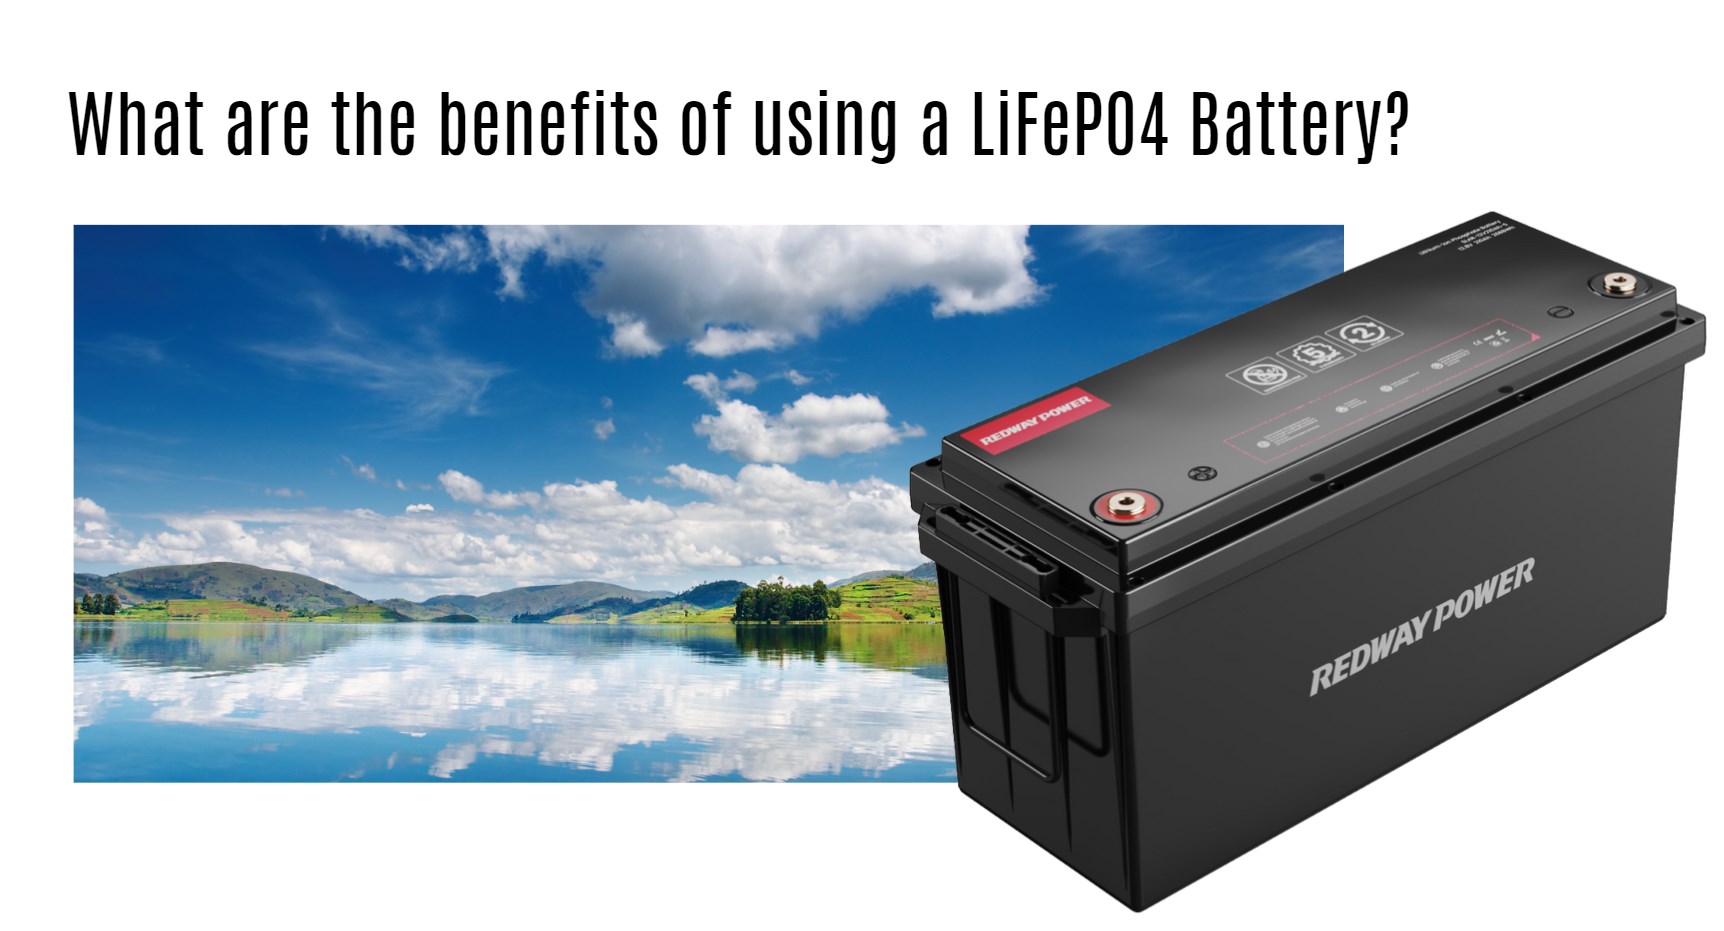 What are the benefits of using a LiFePO4 Battery?